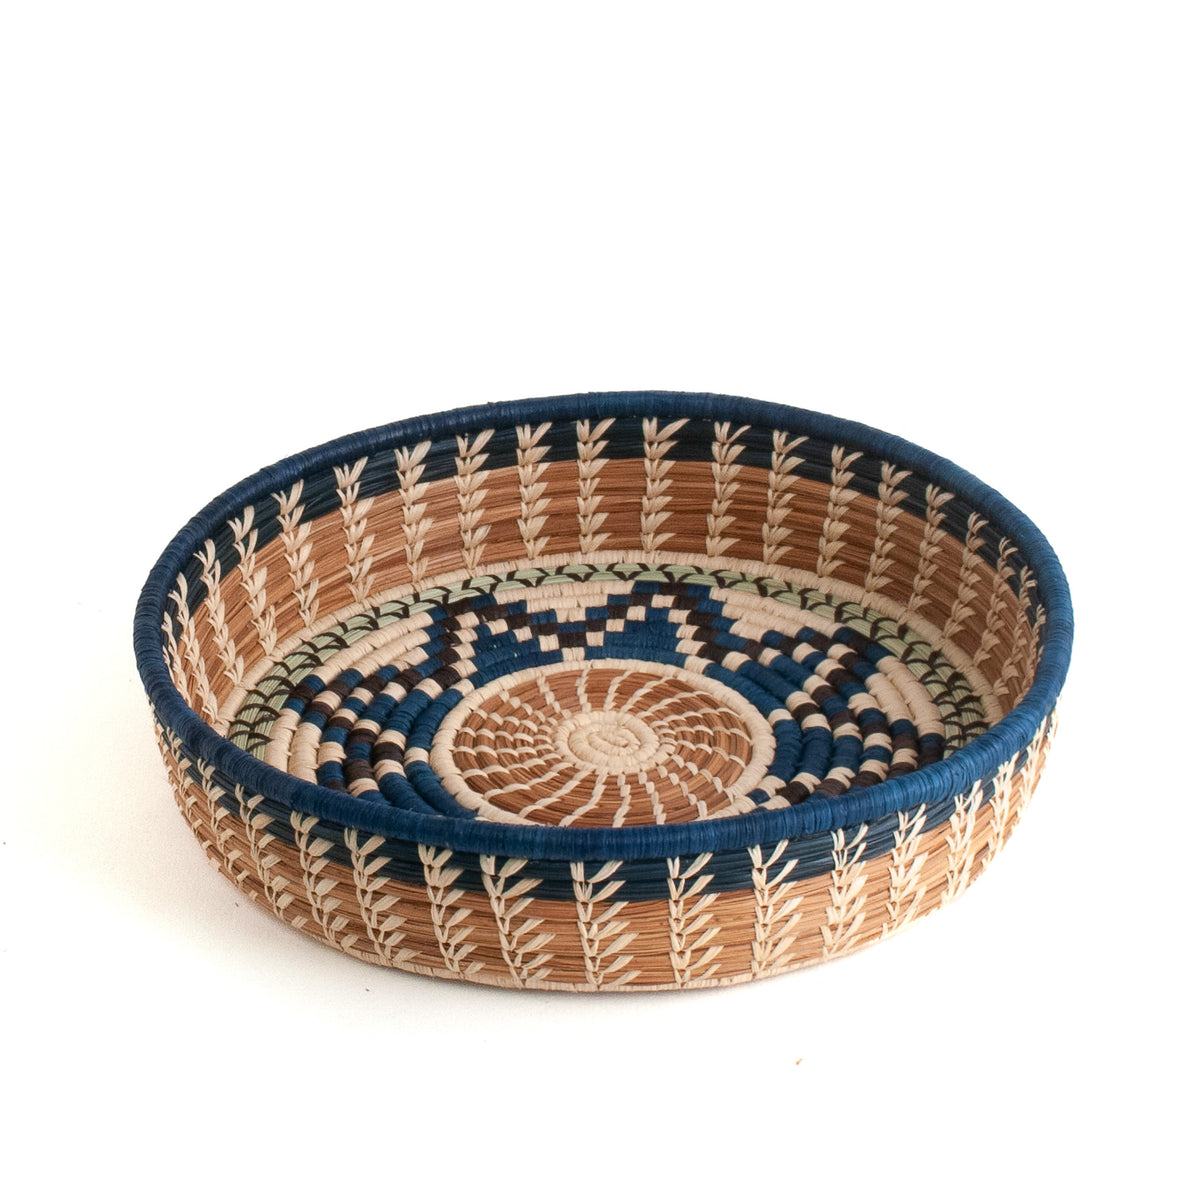 Pine needle basket with central star pattern - alt view